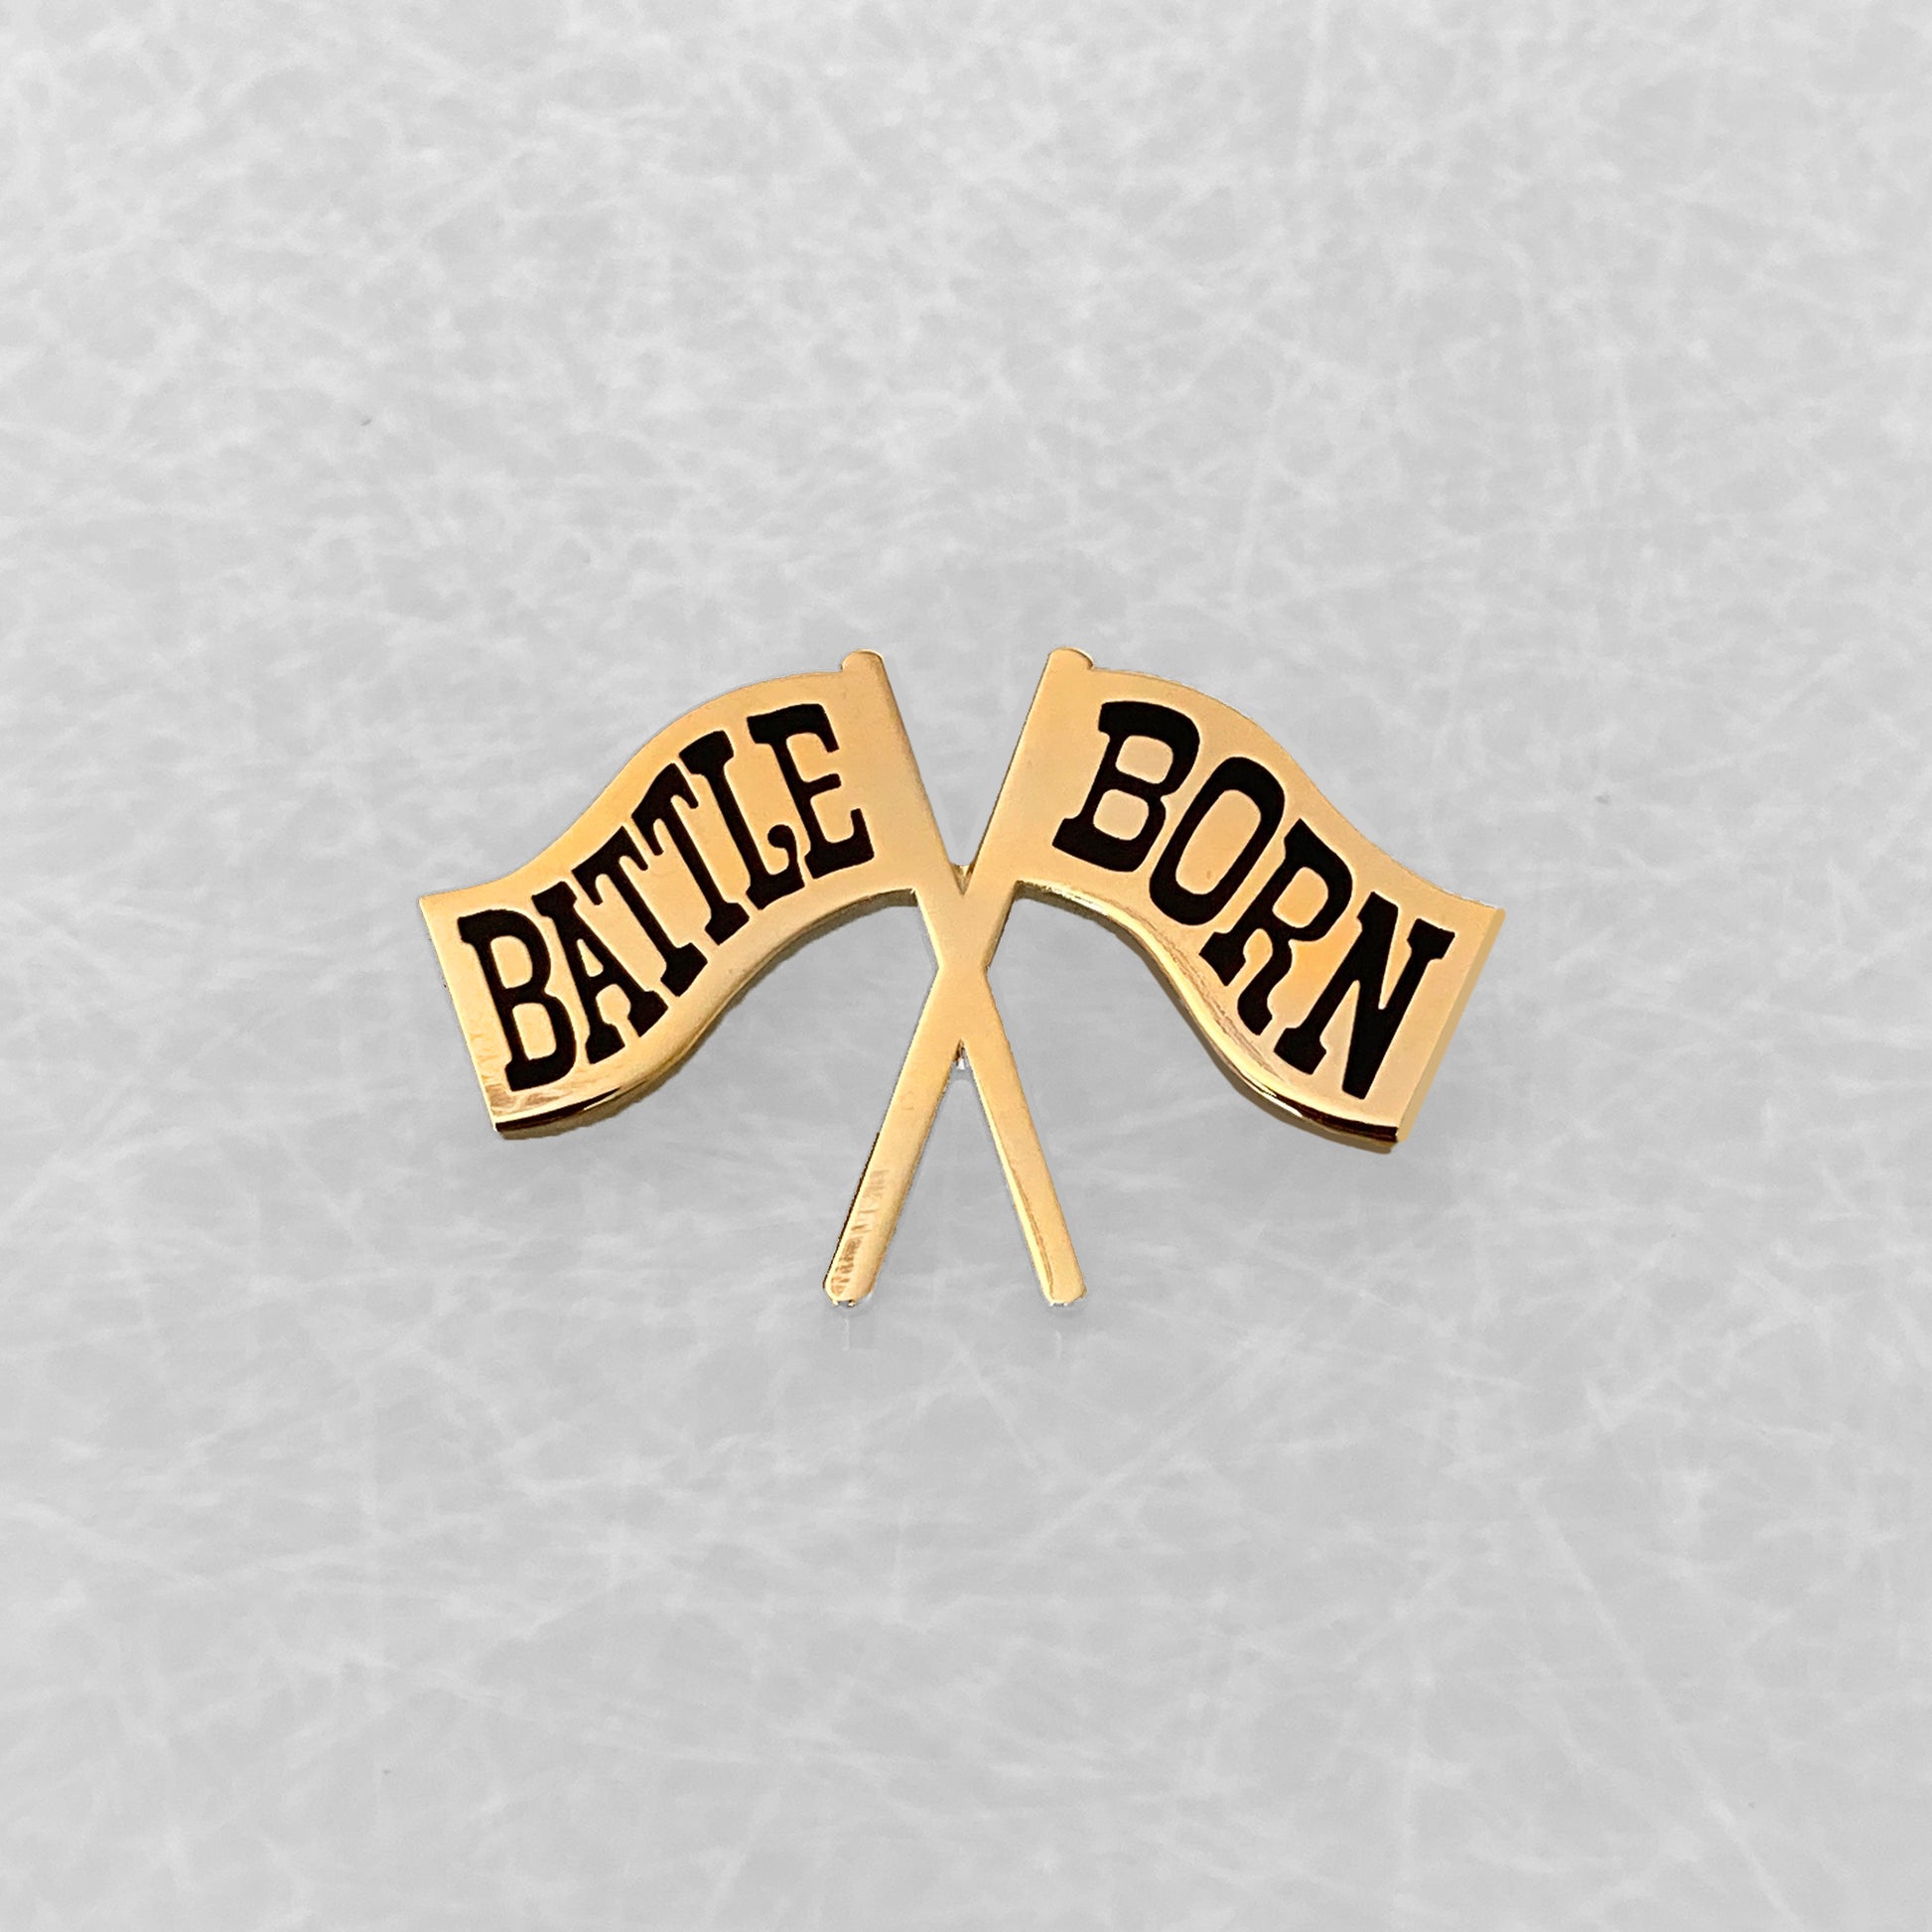 Battle Born Pins Blooming Flower Pin White